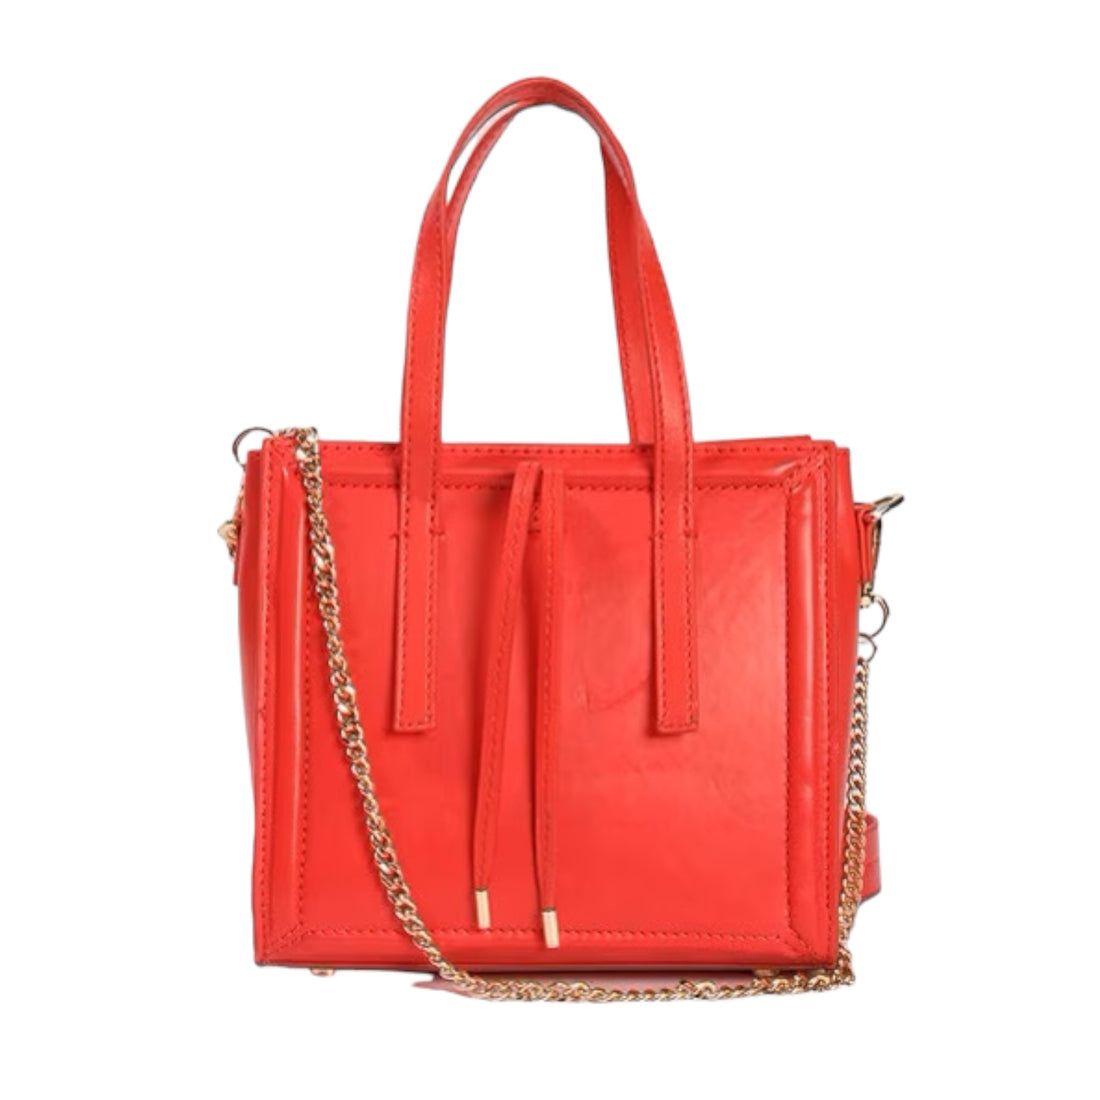 Ladies Leather Bag with  metal chain strap